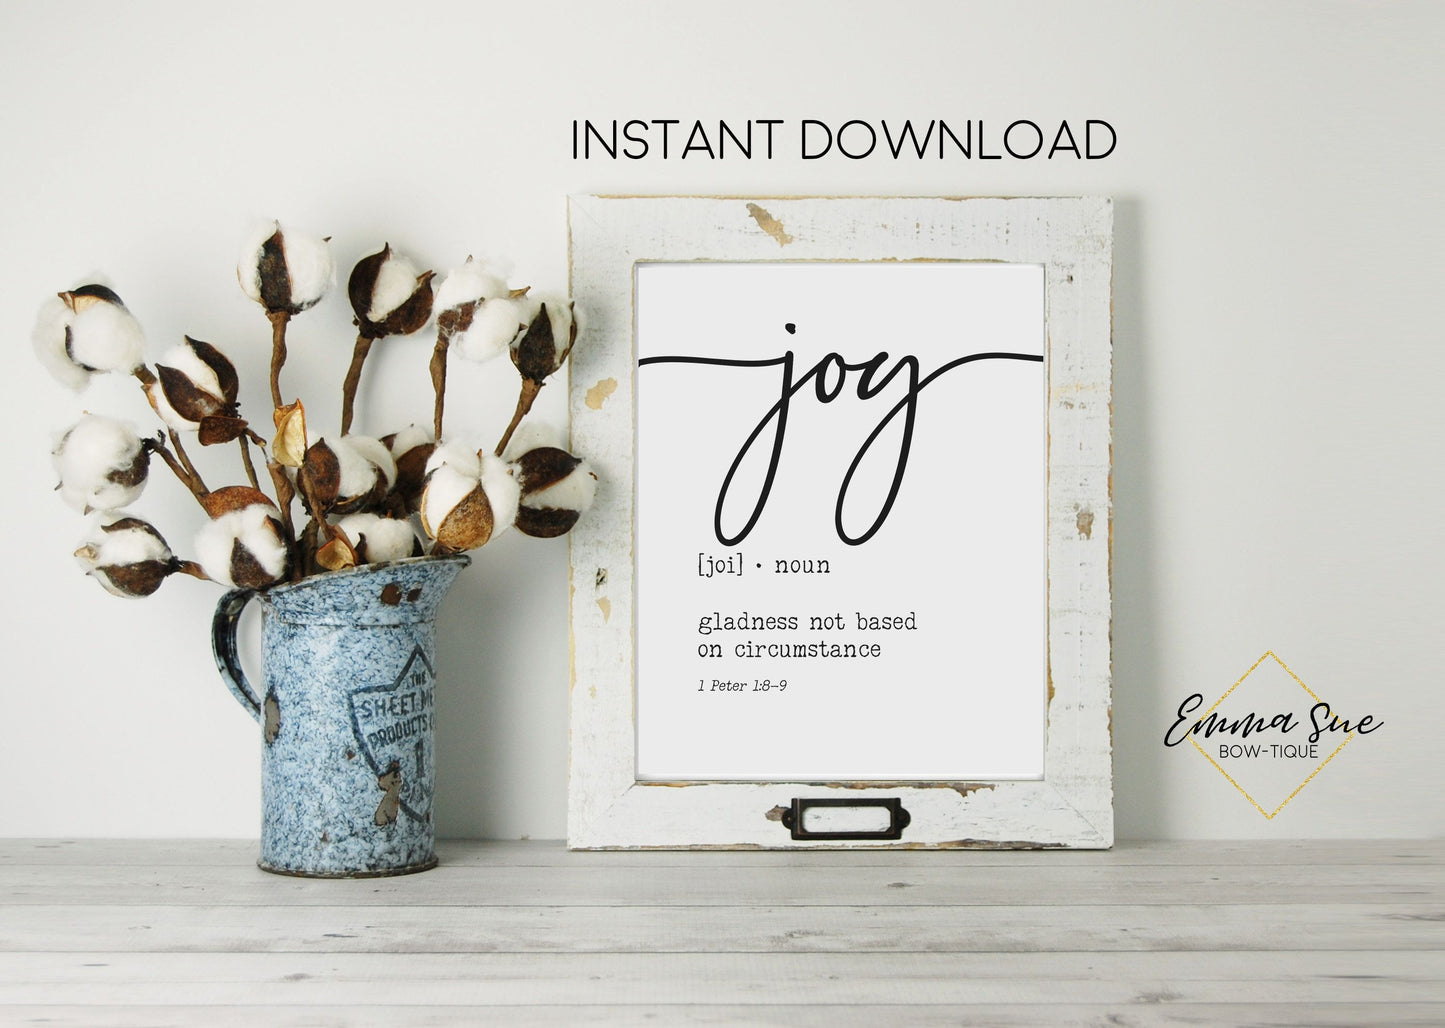 Joy Biblical Definition - Gladness not based on circumstance 1 Peter 1:6-9 Bible Verse Printable Sign